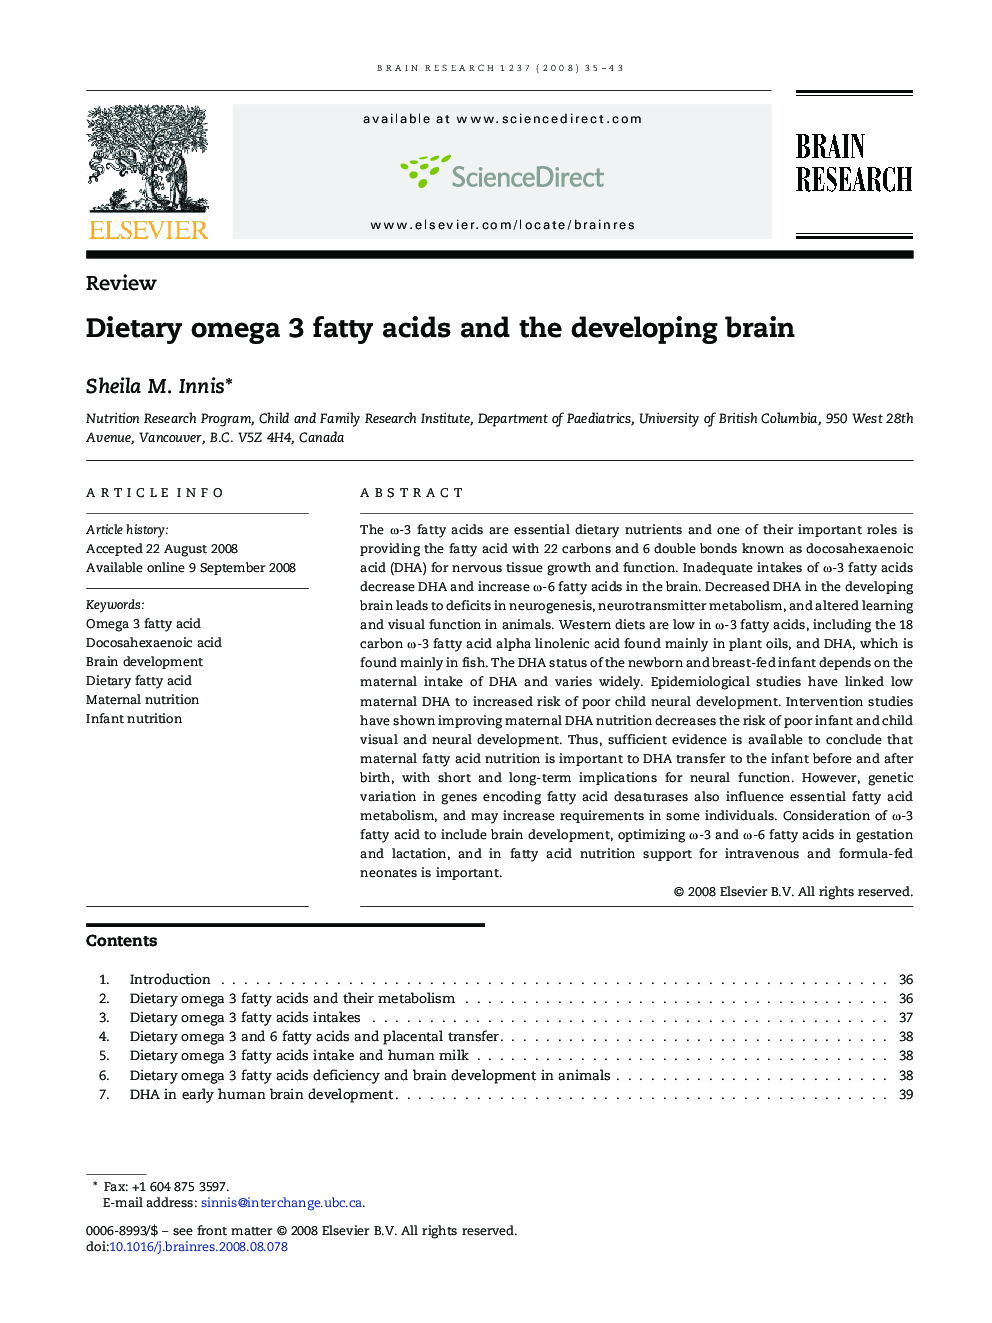 Dietary omega 3 fatty acids and the developing brain